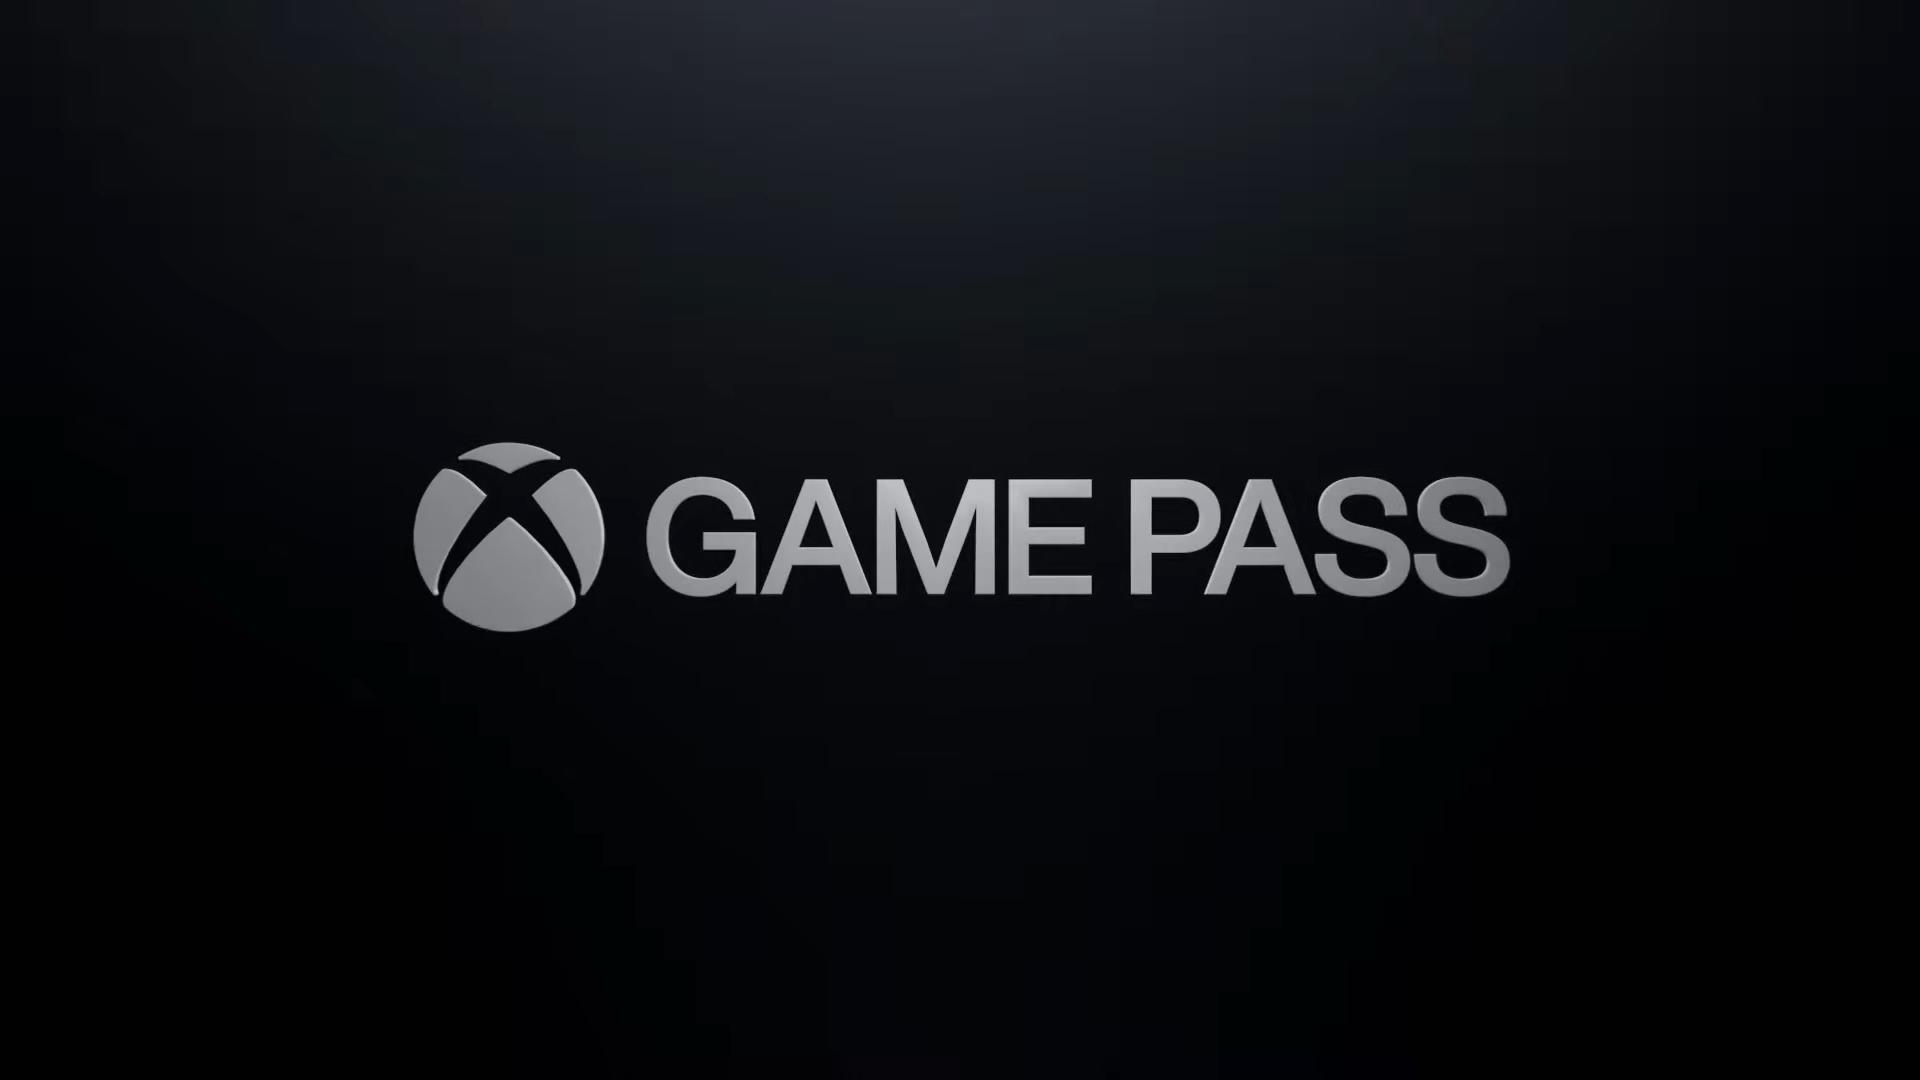 Microsoft could introduce a cheaper, ad-supported Game Pass tier, survey suggests | VGC